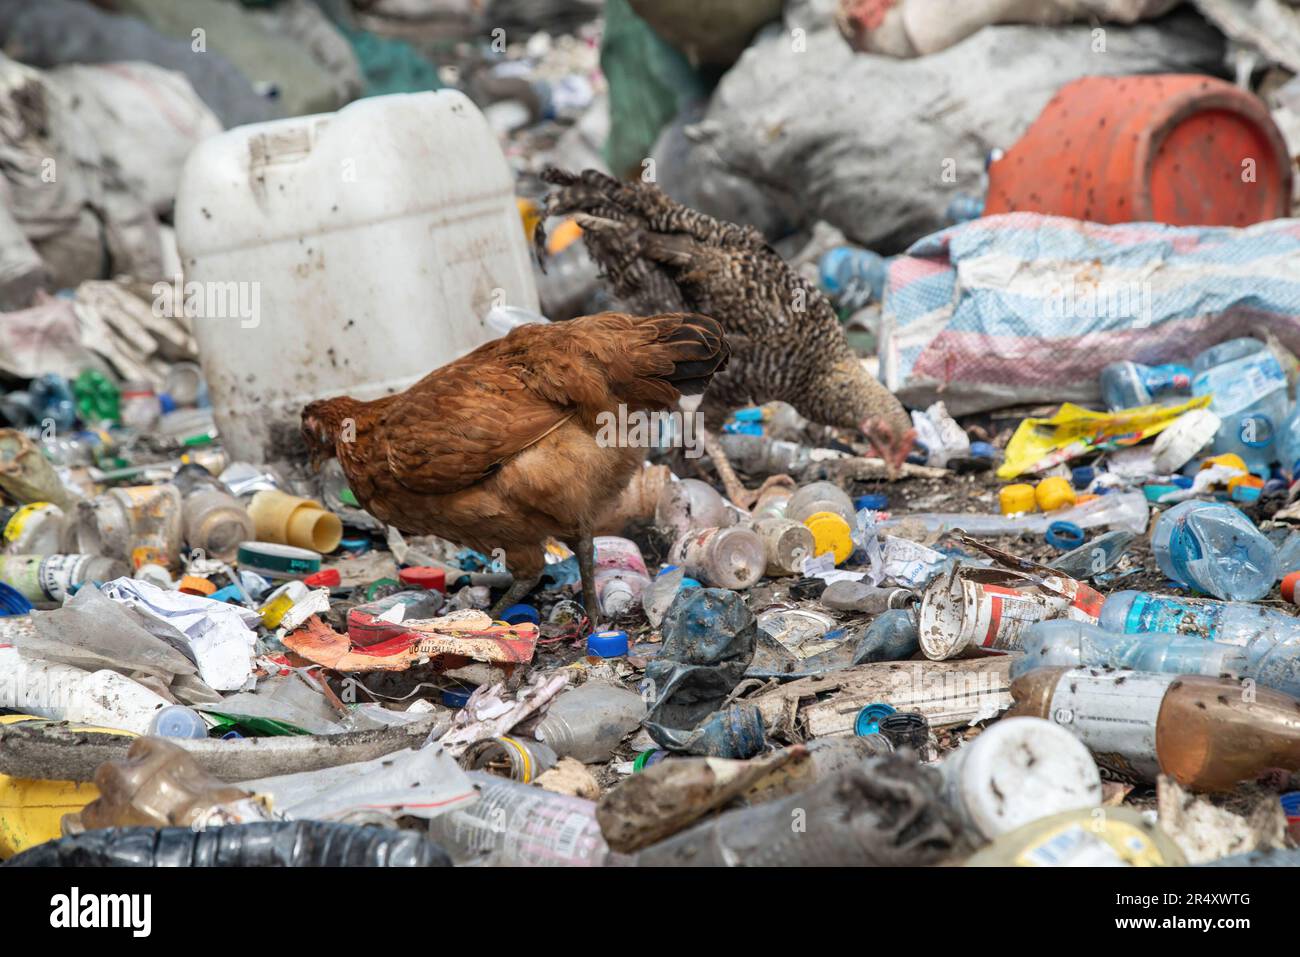 Chicken seen feeding at a plastic recycling plant in Nakuru. Negotiators have gathered in Paris, France for the second round of deliberations to develop a global treaty aimed at tackling the escalating issue of plastic pollution. According to a recent report by the United Nations Environment Programme (UNEP), countries have the potential to reduce plastic pollution by 80% by 2040 by eliminating unnecessary plastics, implementing recycling and reuse strategies, introducing deposit return schemes, and substituting plastic with sustainable alternative materials. (Photo by James Wakibia/SOPA Ima Stock Photo